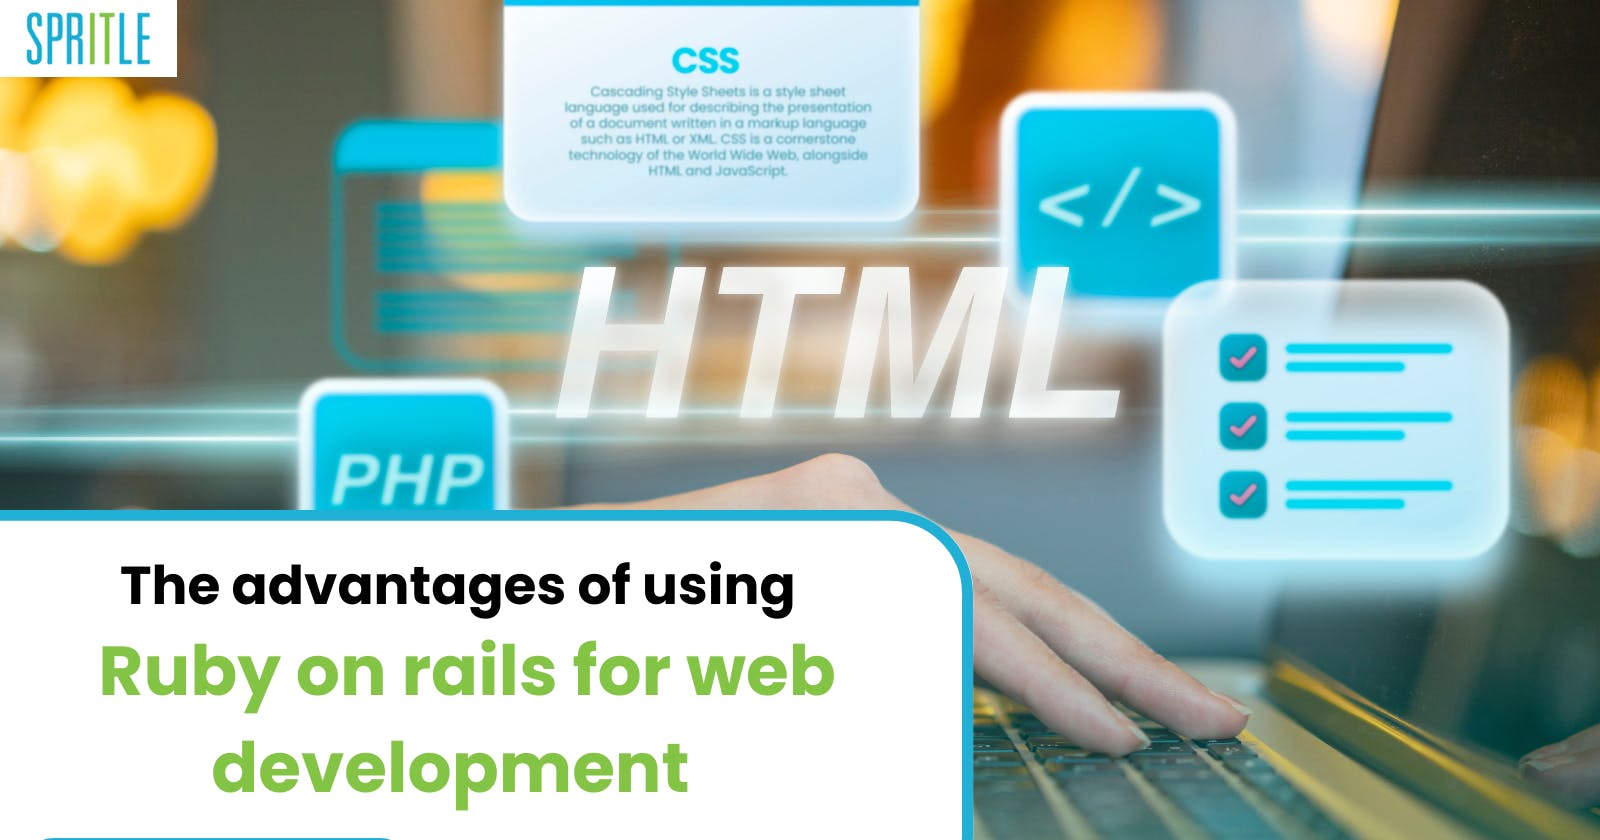 The advantages of using Ruby on rails for web development